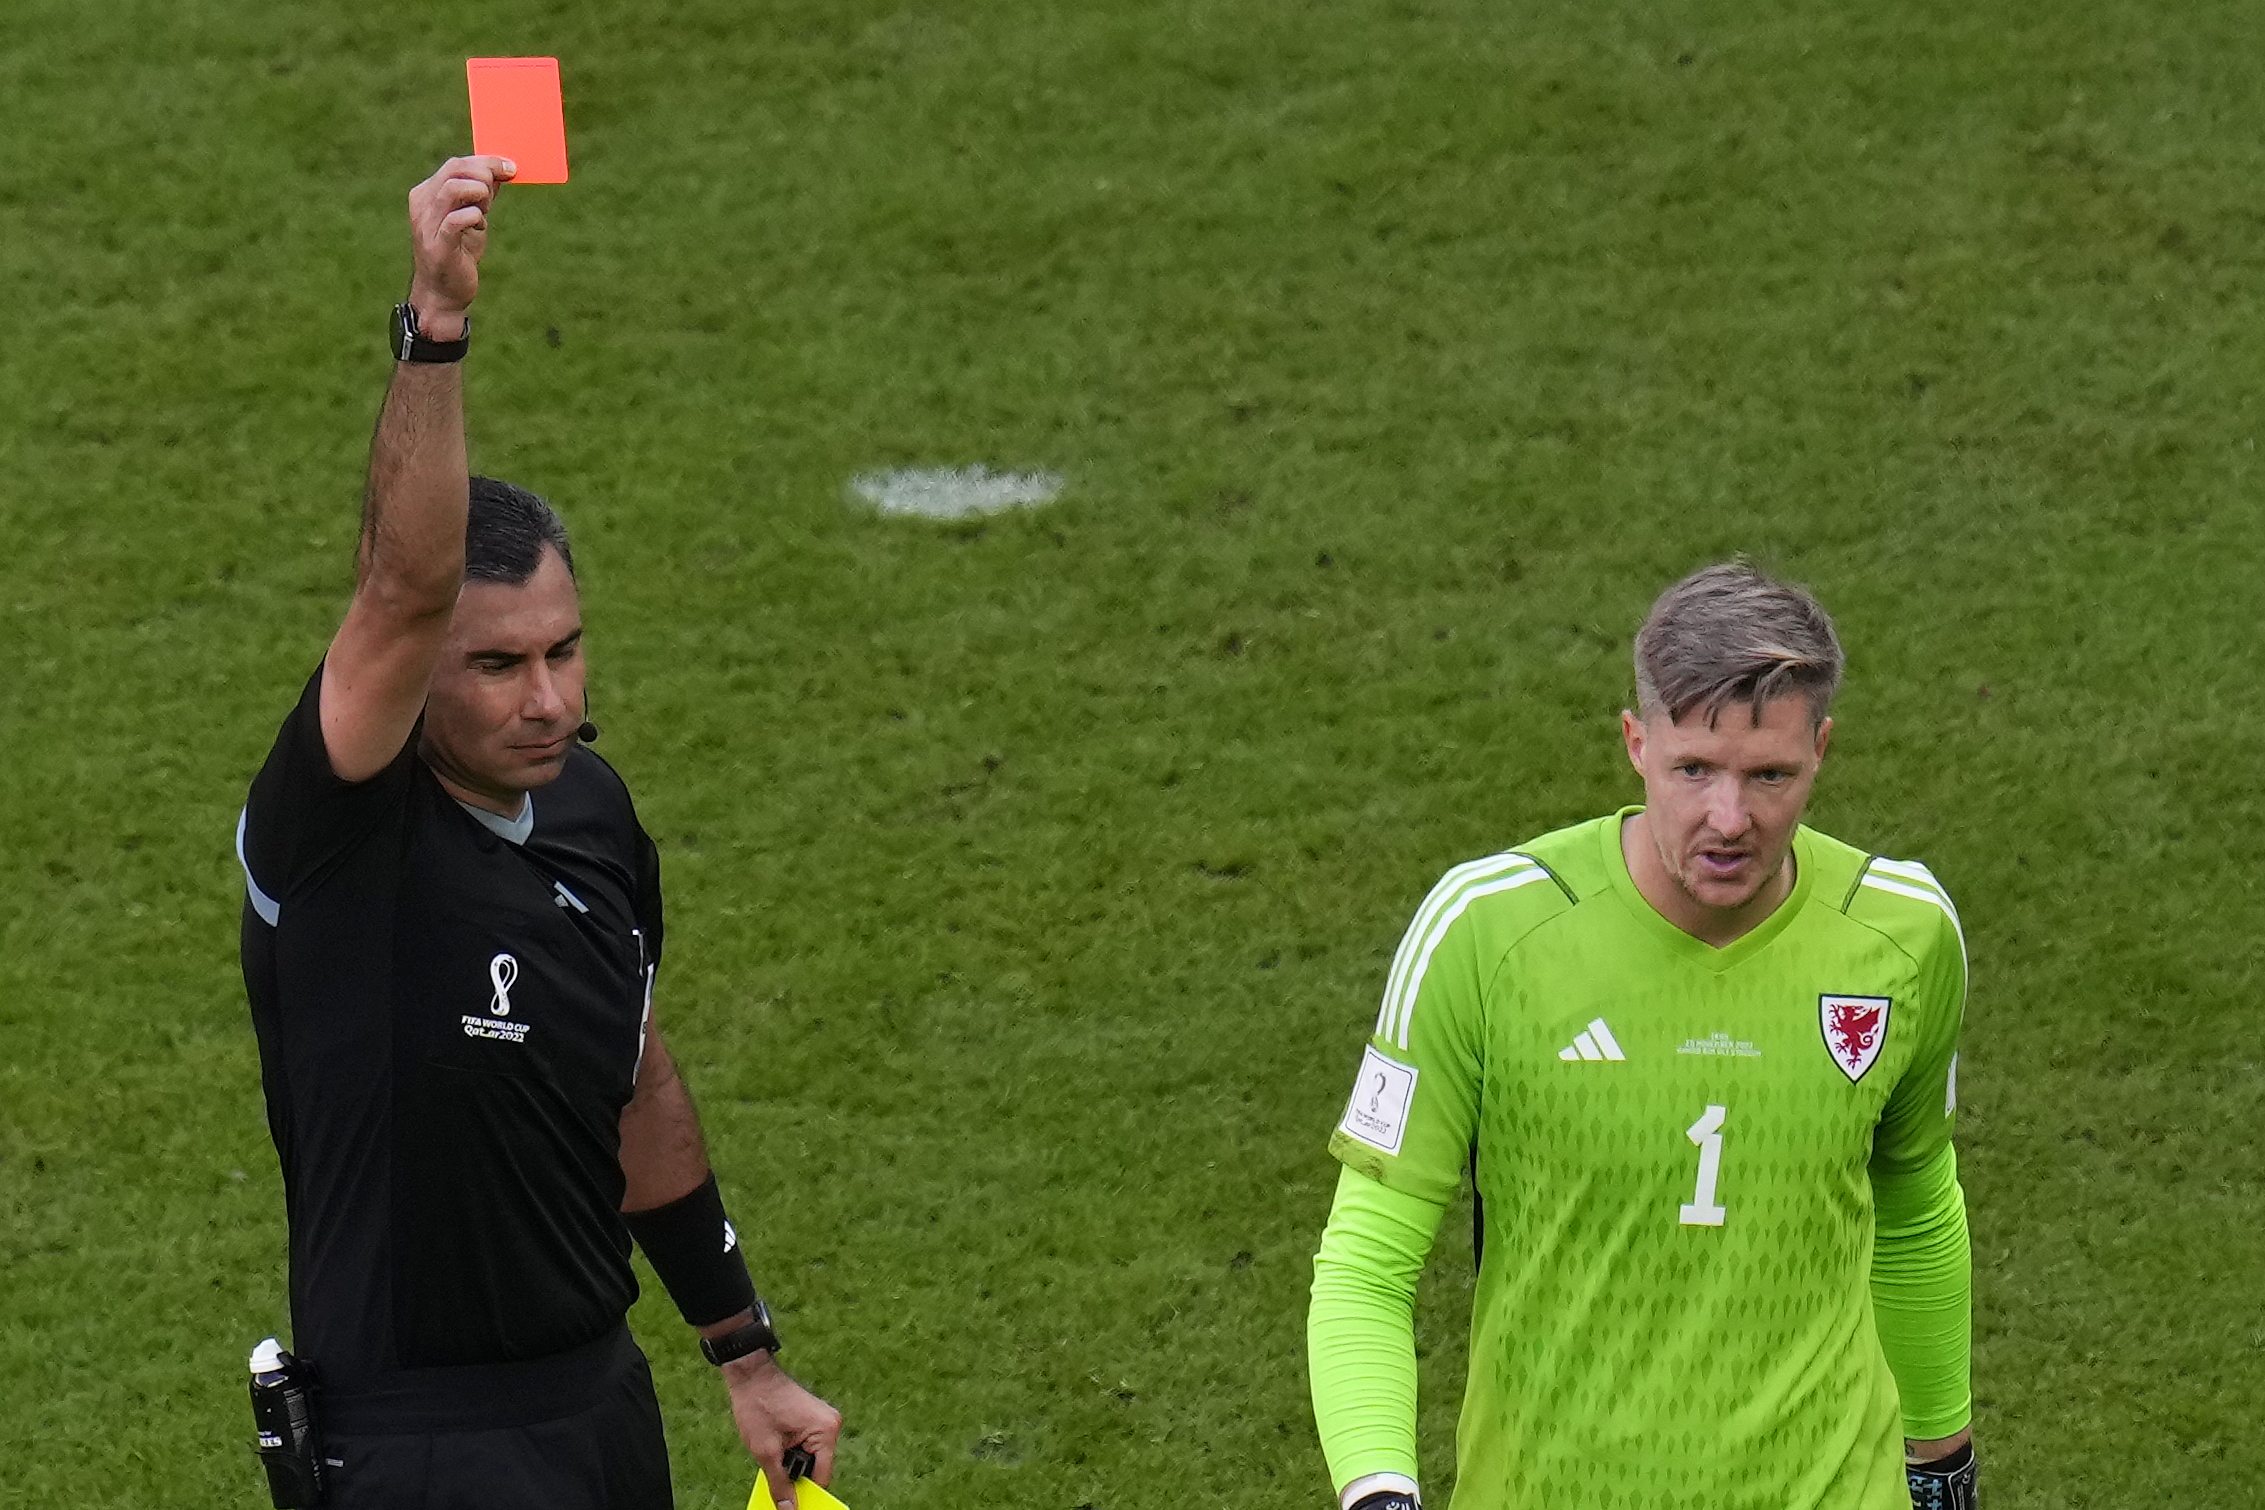 Wales goalkeeper Wayne Hennessey got the first red card of FIFA World Cup 2022.